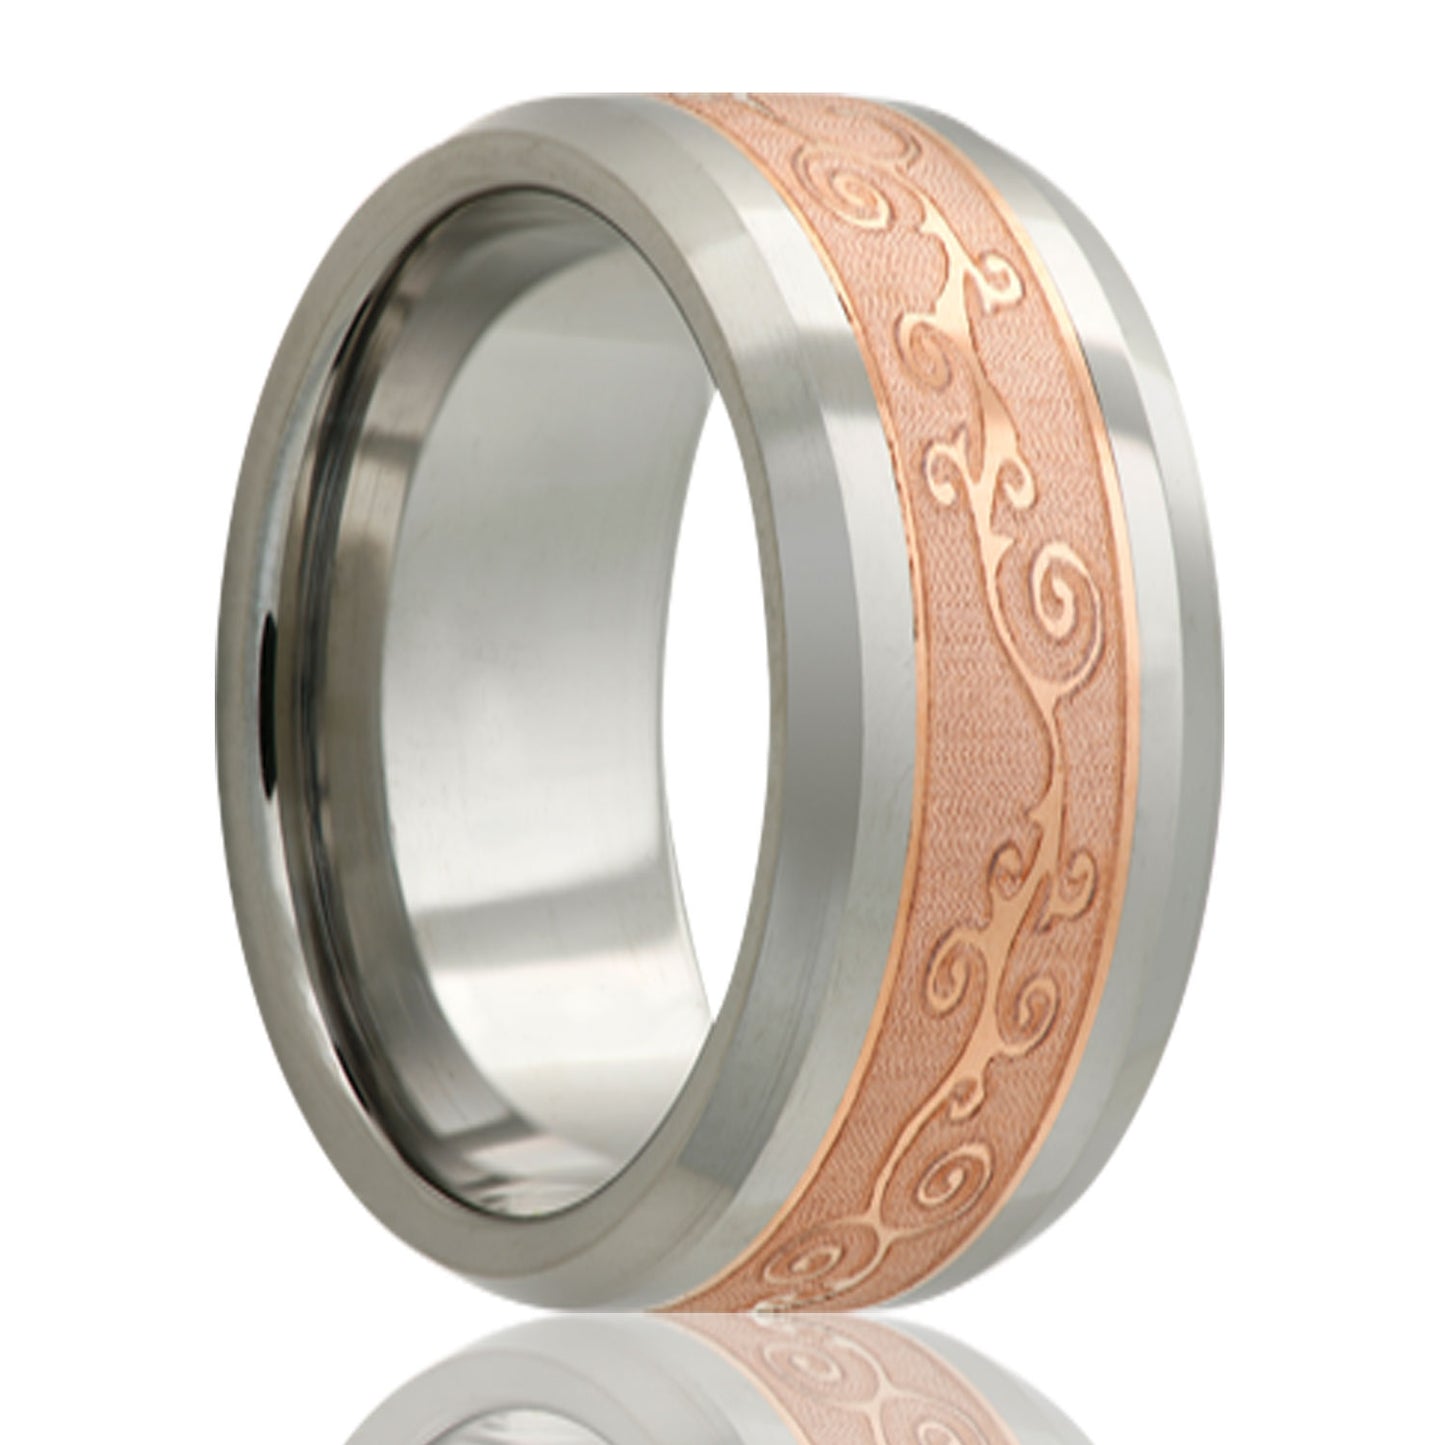 A scroll pattern copper inlay tungsten men's wedding band with beveled edges displayed on a neutral white background.